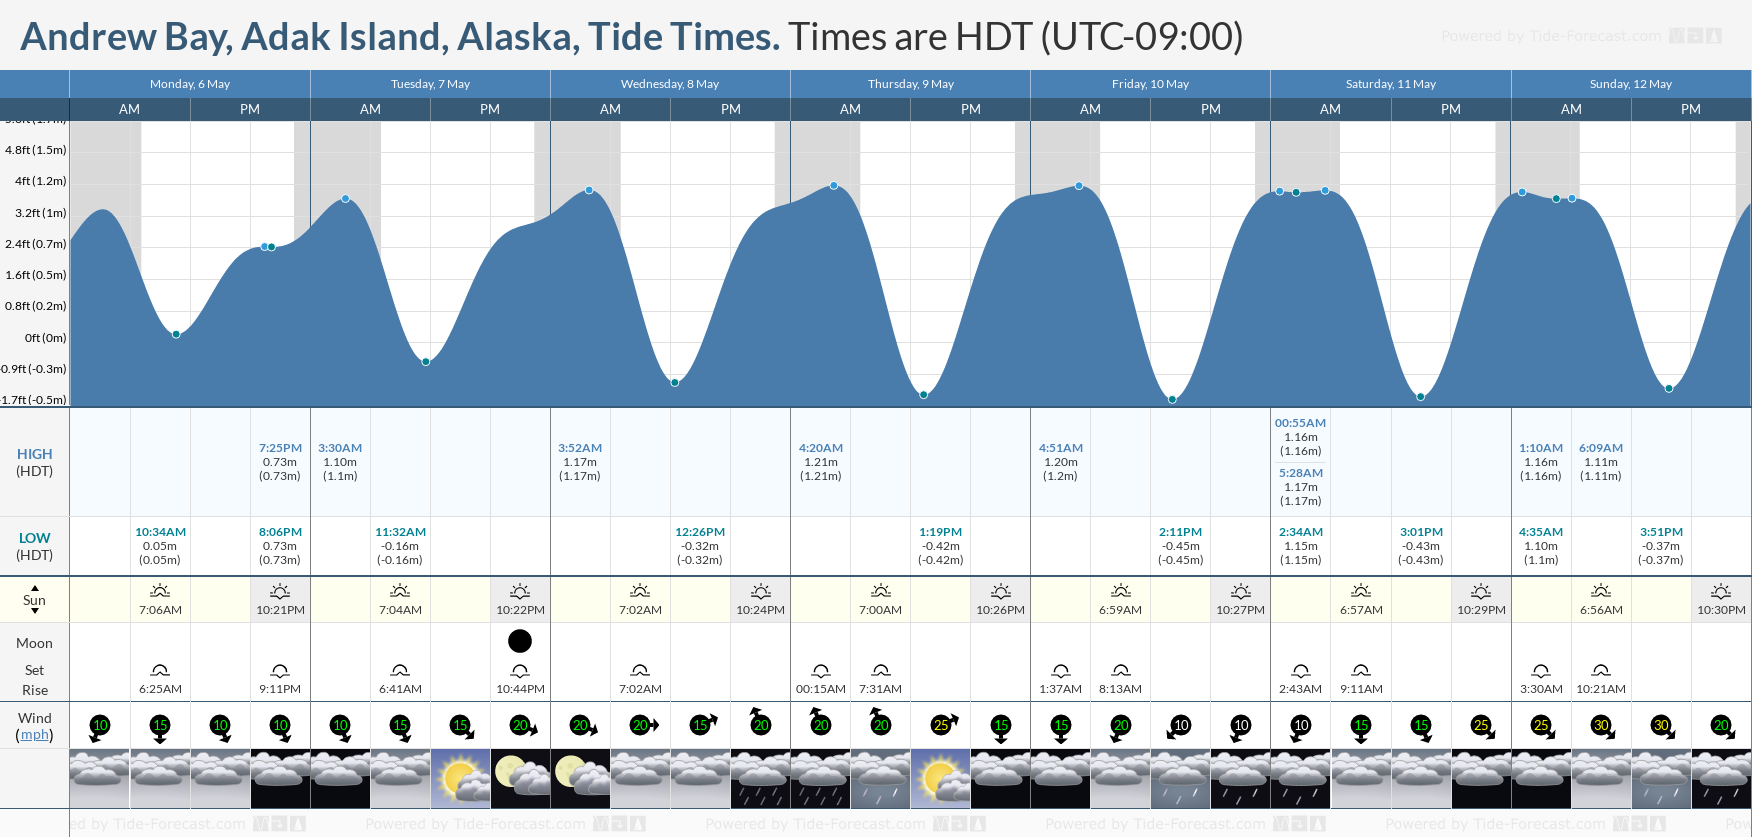 Andrew Bay, Adak Island, Alaska Tide Chart including high and low tide tide times for the next 7 days